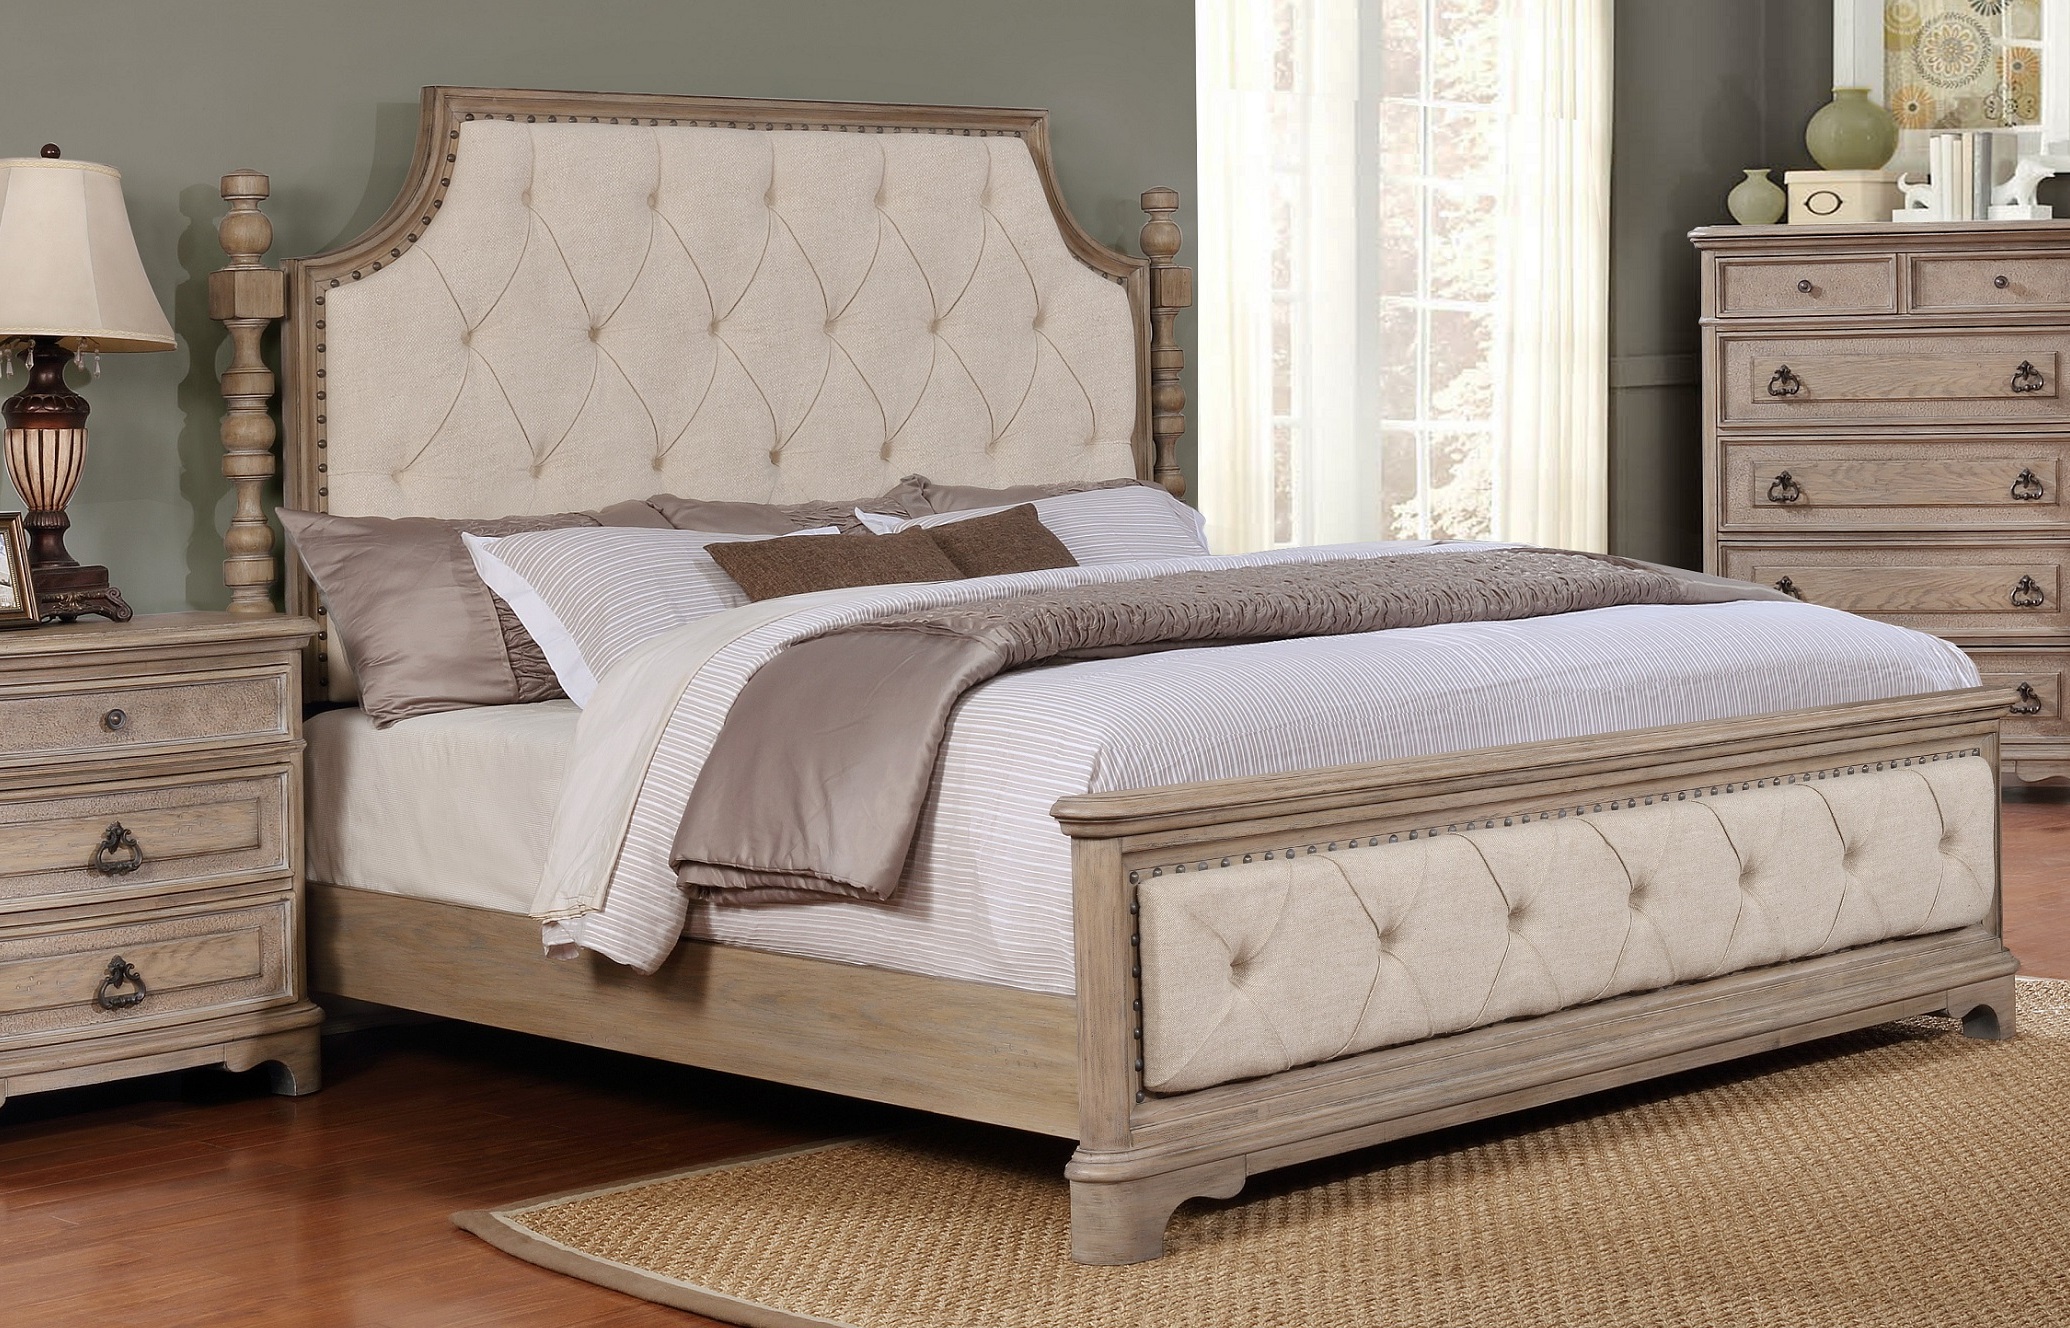 Piraeus Wood Bedroom Set with Upholstered Tufted Bed, Dresser, Mirror and 2 Nightstands, White Washed Finish, Queen Size - image 2 of 8